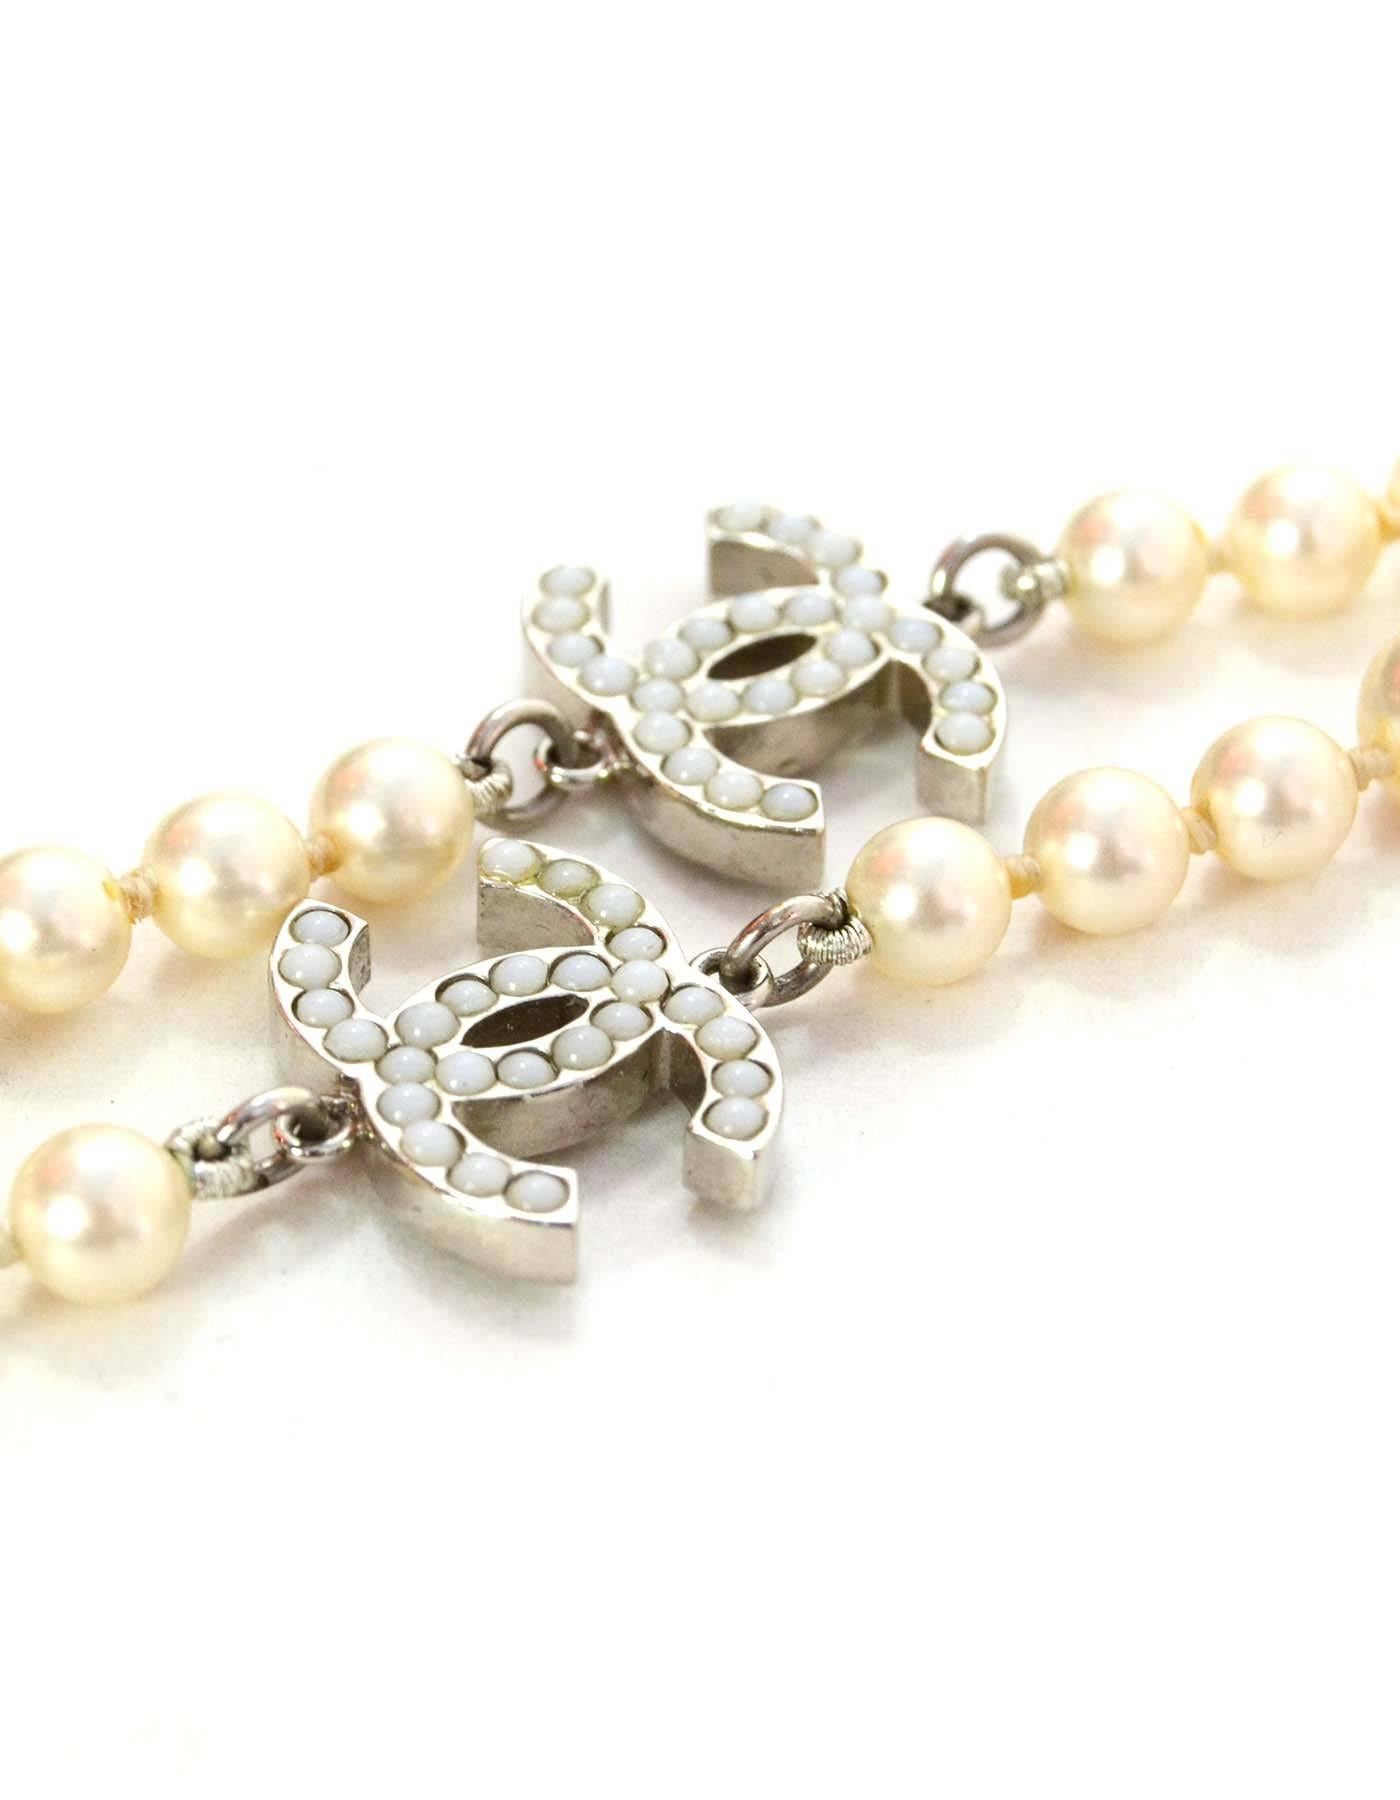 Chanel Graduated Pearl Necklace
Features CC pendants
Made In: France
Year of Production: 2010
Color: Ivory
Hardware: Silvertone
Materials: Faux pearl, metal
Closure: Lobster claw
Stamp: 10 CC V
Overall Condition: Excellent pre-owned